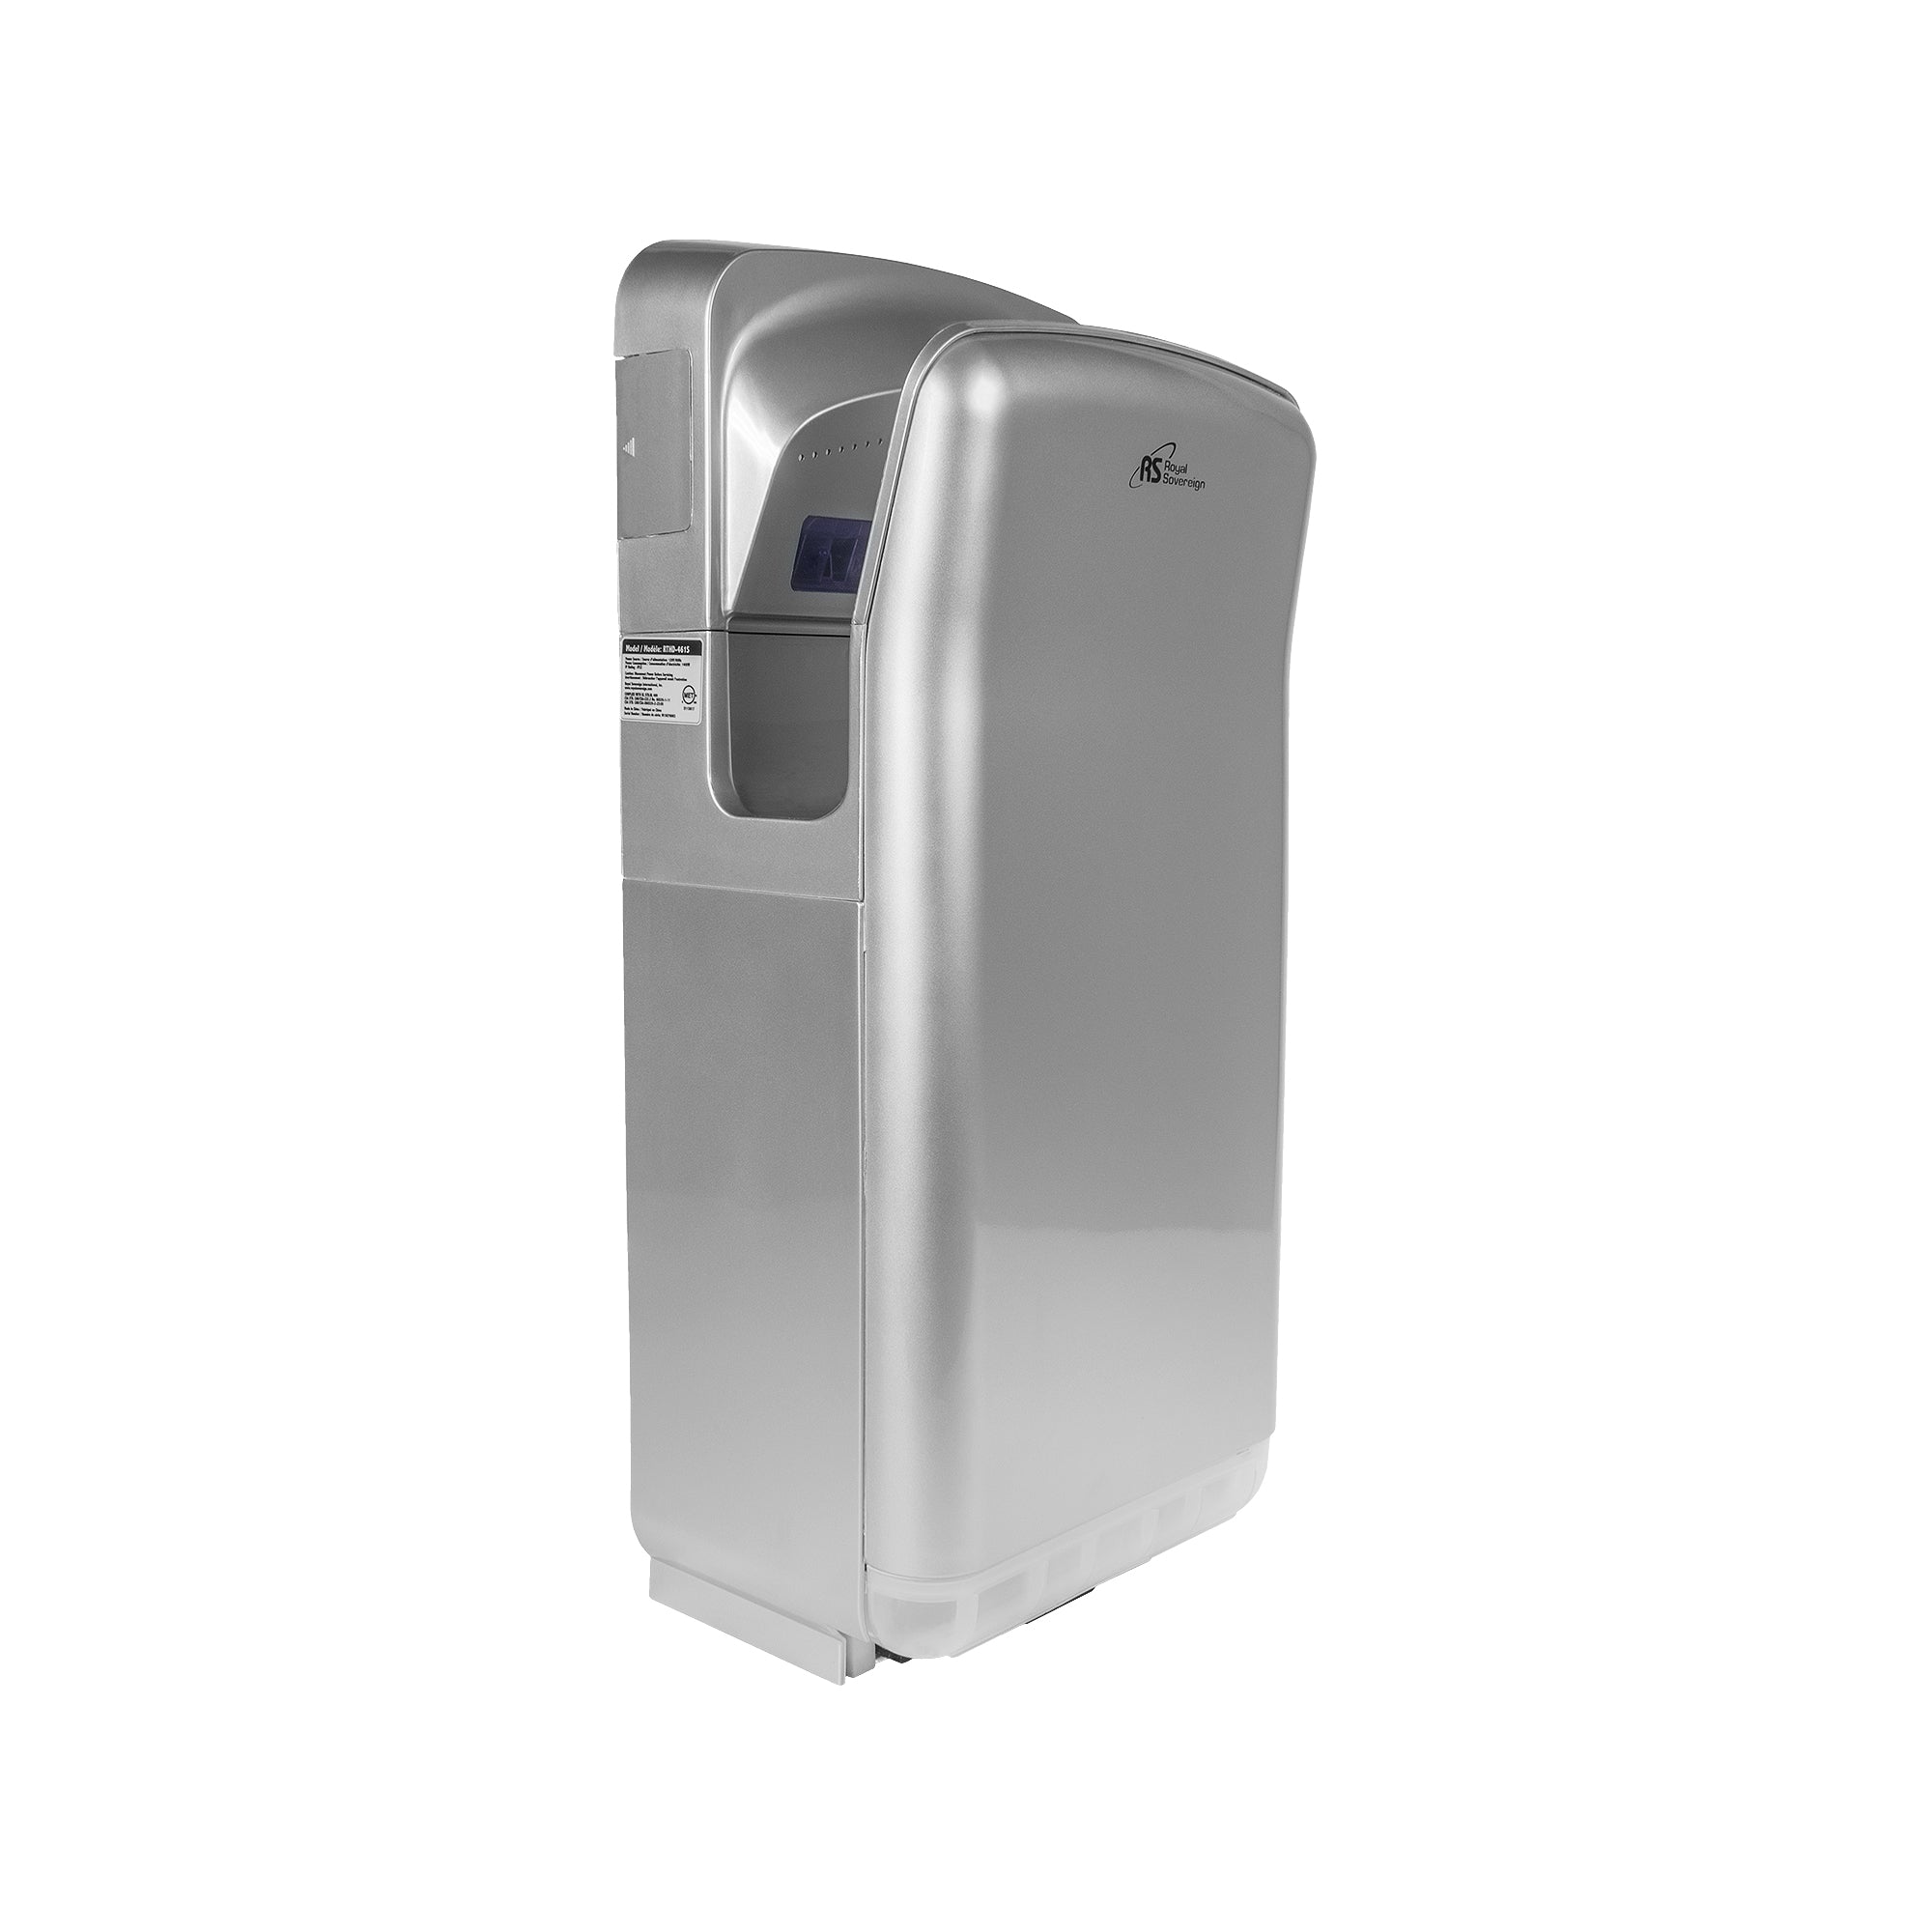 RTHD-461S, Vertical Touchless Automatic Hand Dryer